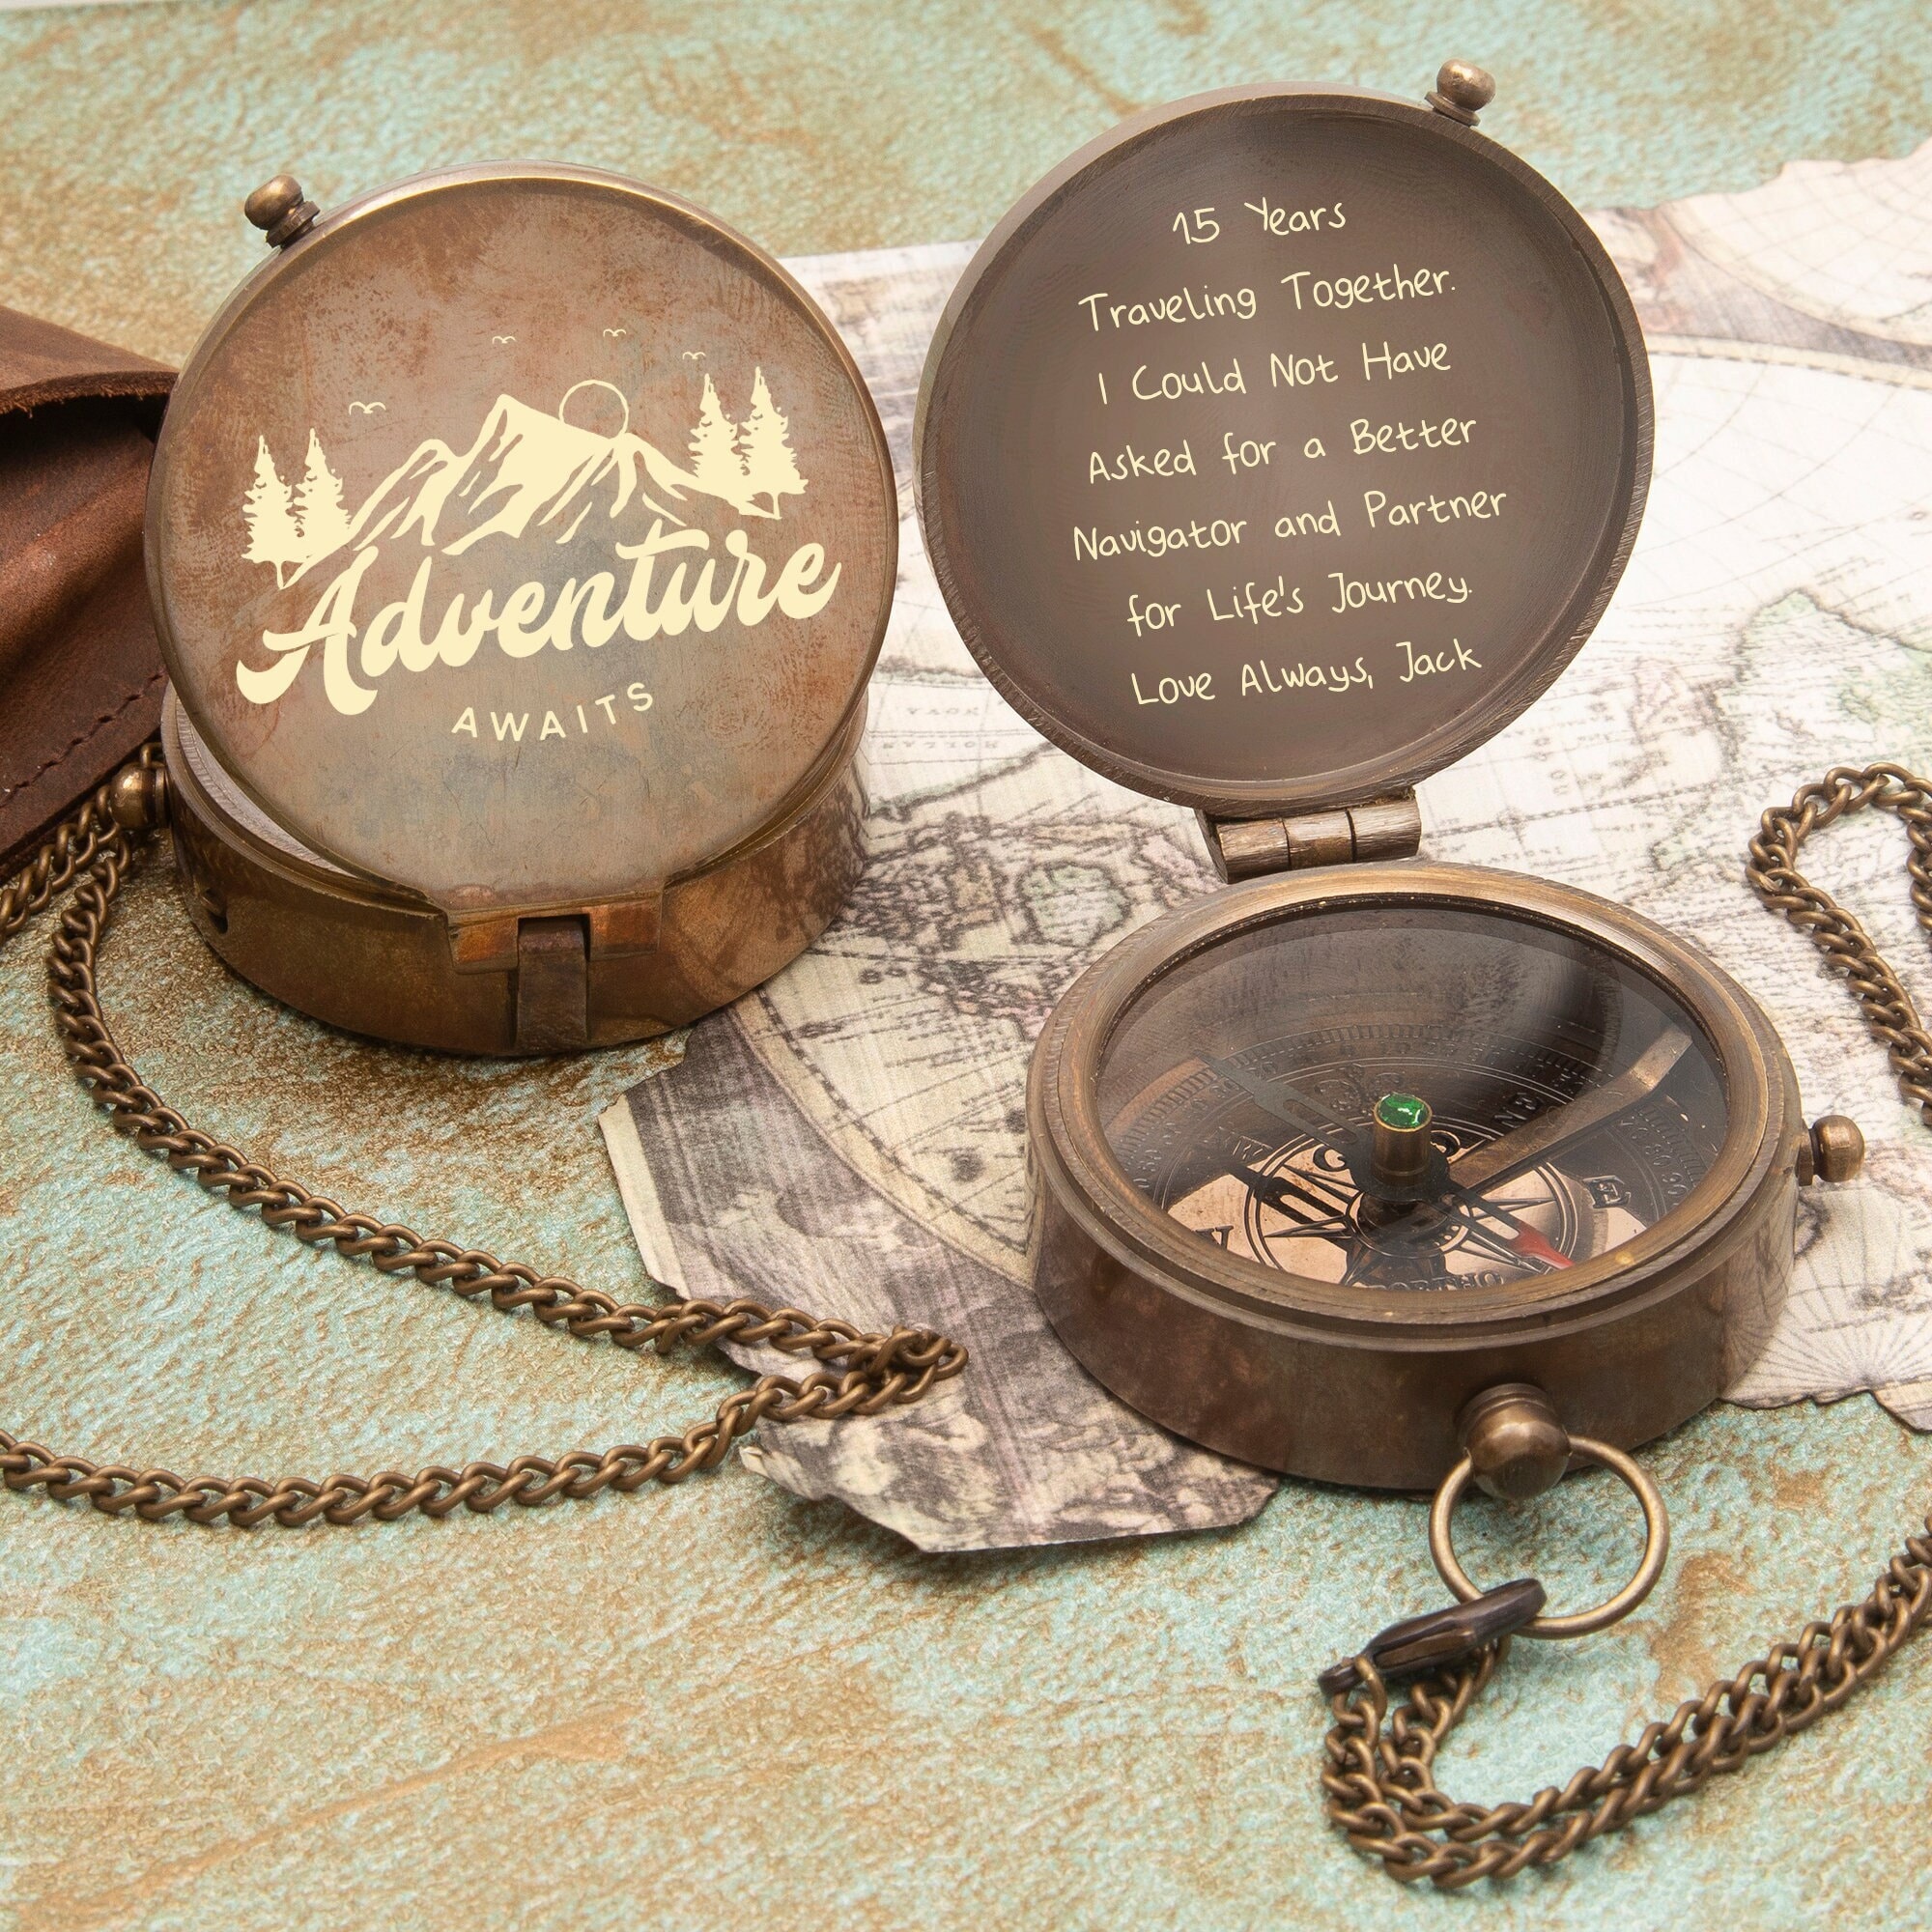 2. "Adventure Awaits" Personalized Compass